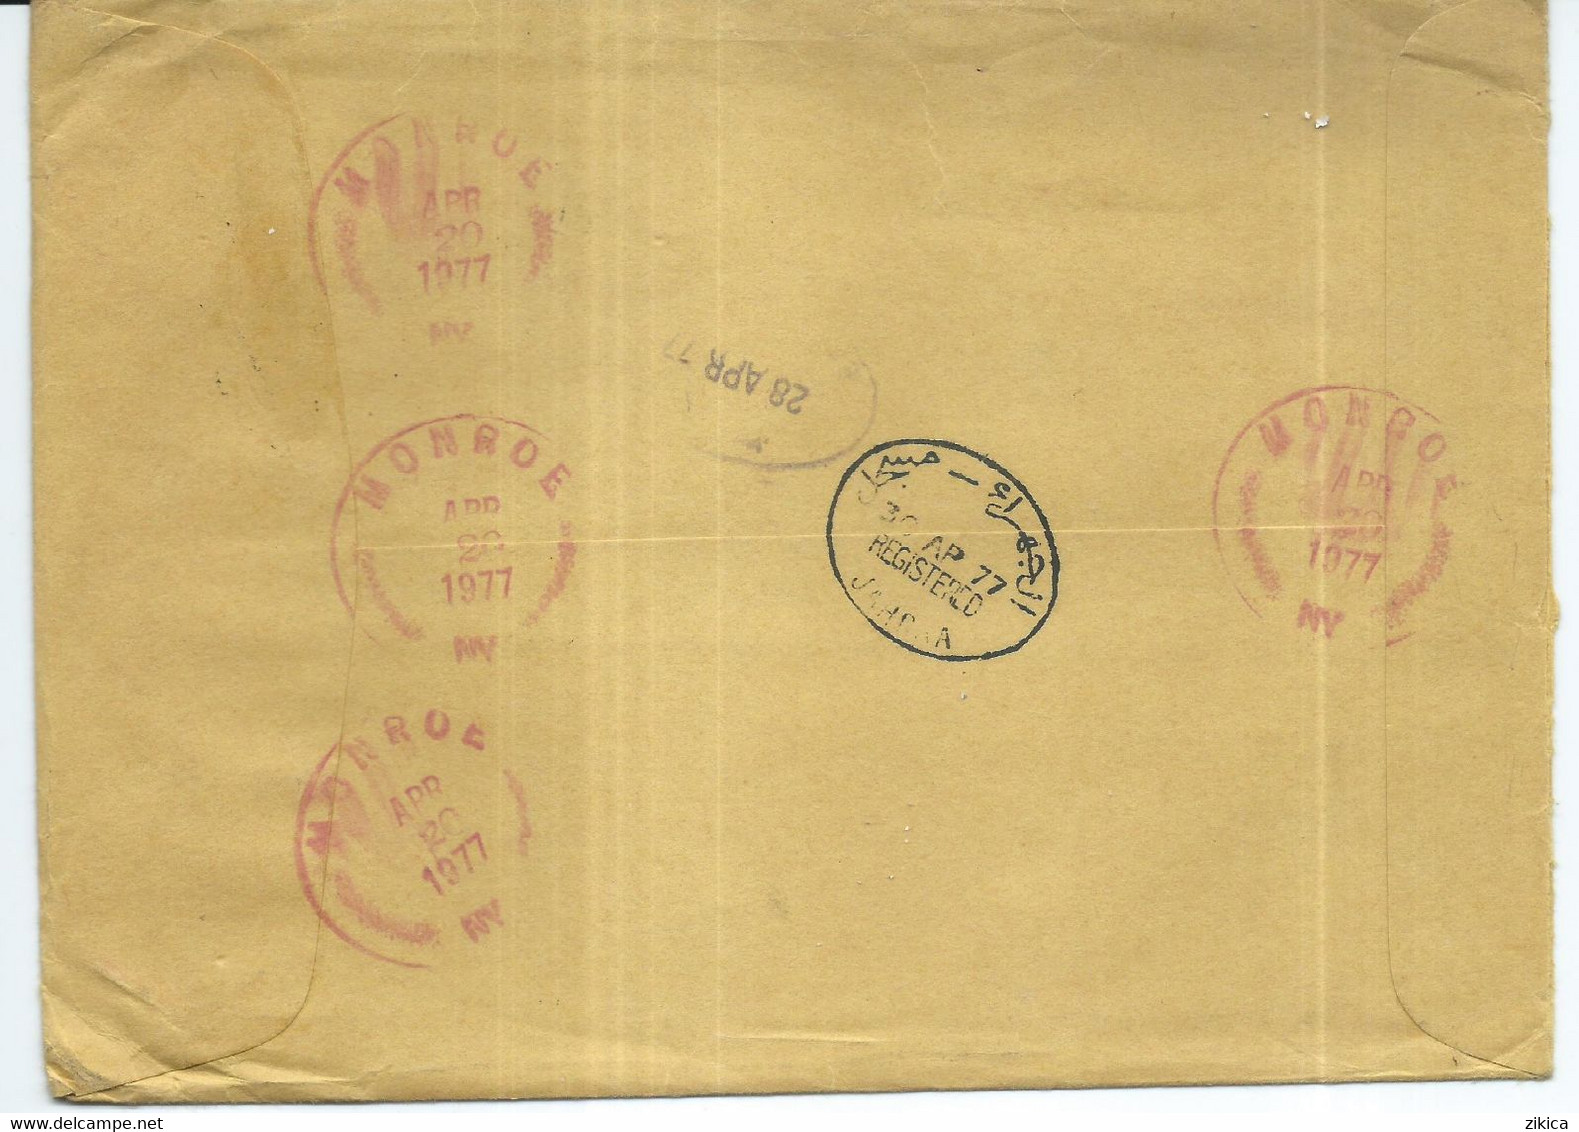 BIG COVER - United States R - Letter Via Kuwait 1977 - Lettres & Documents